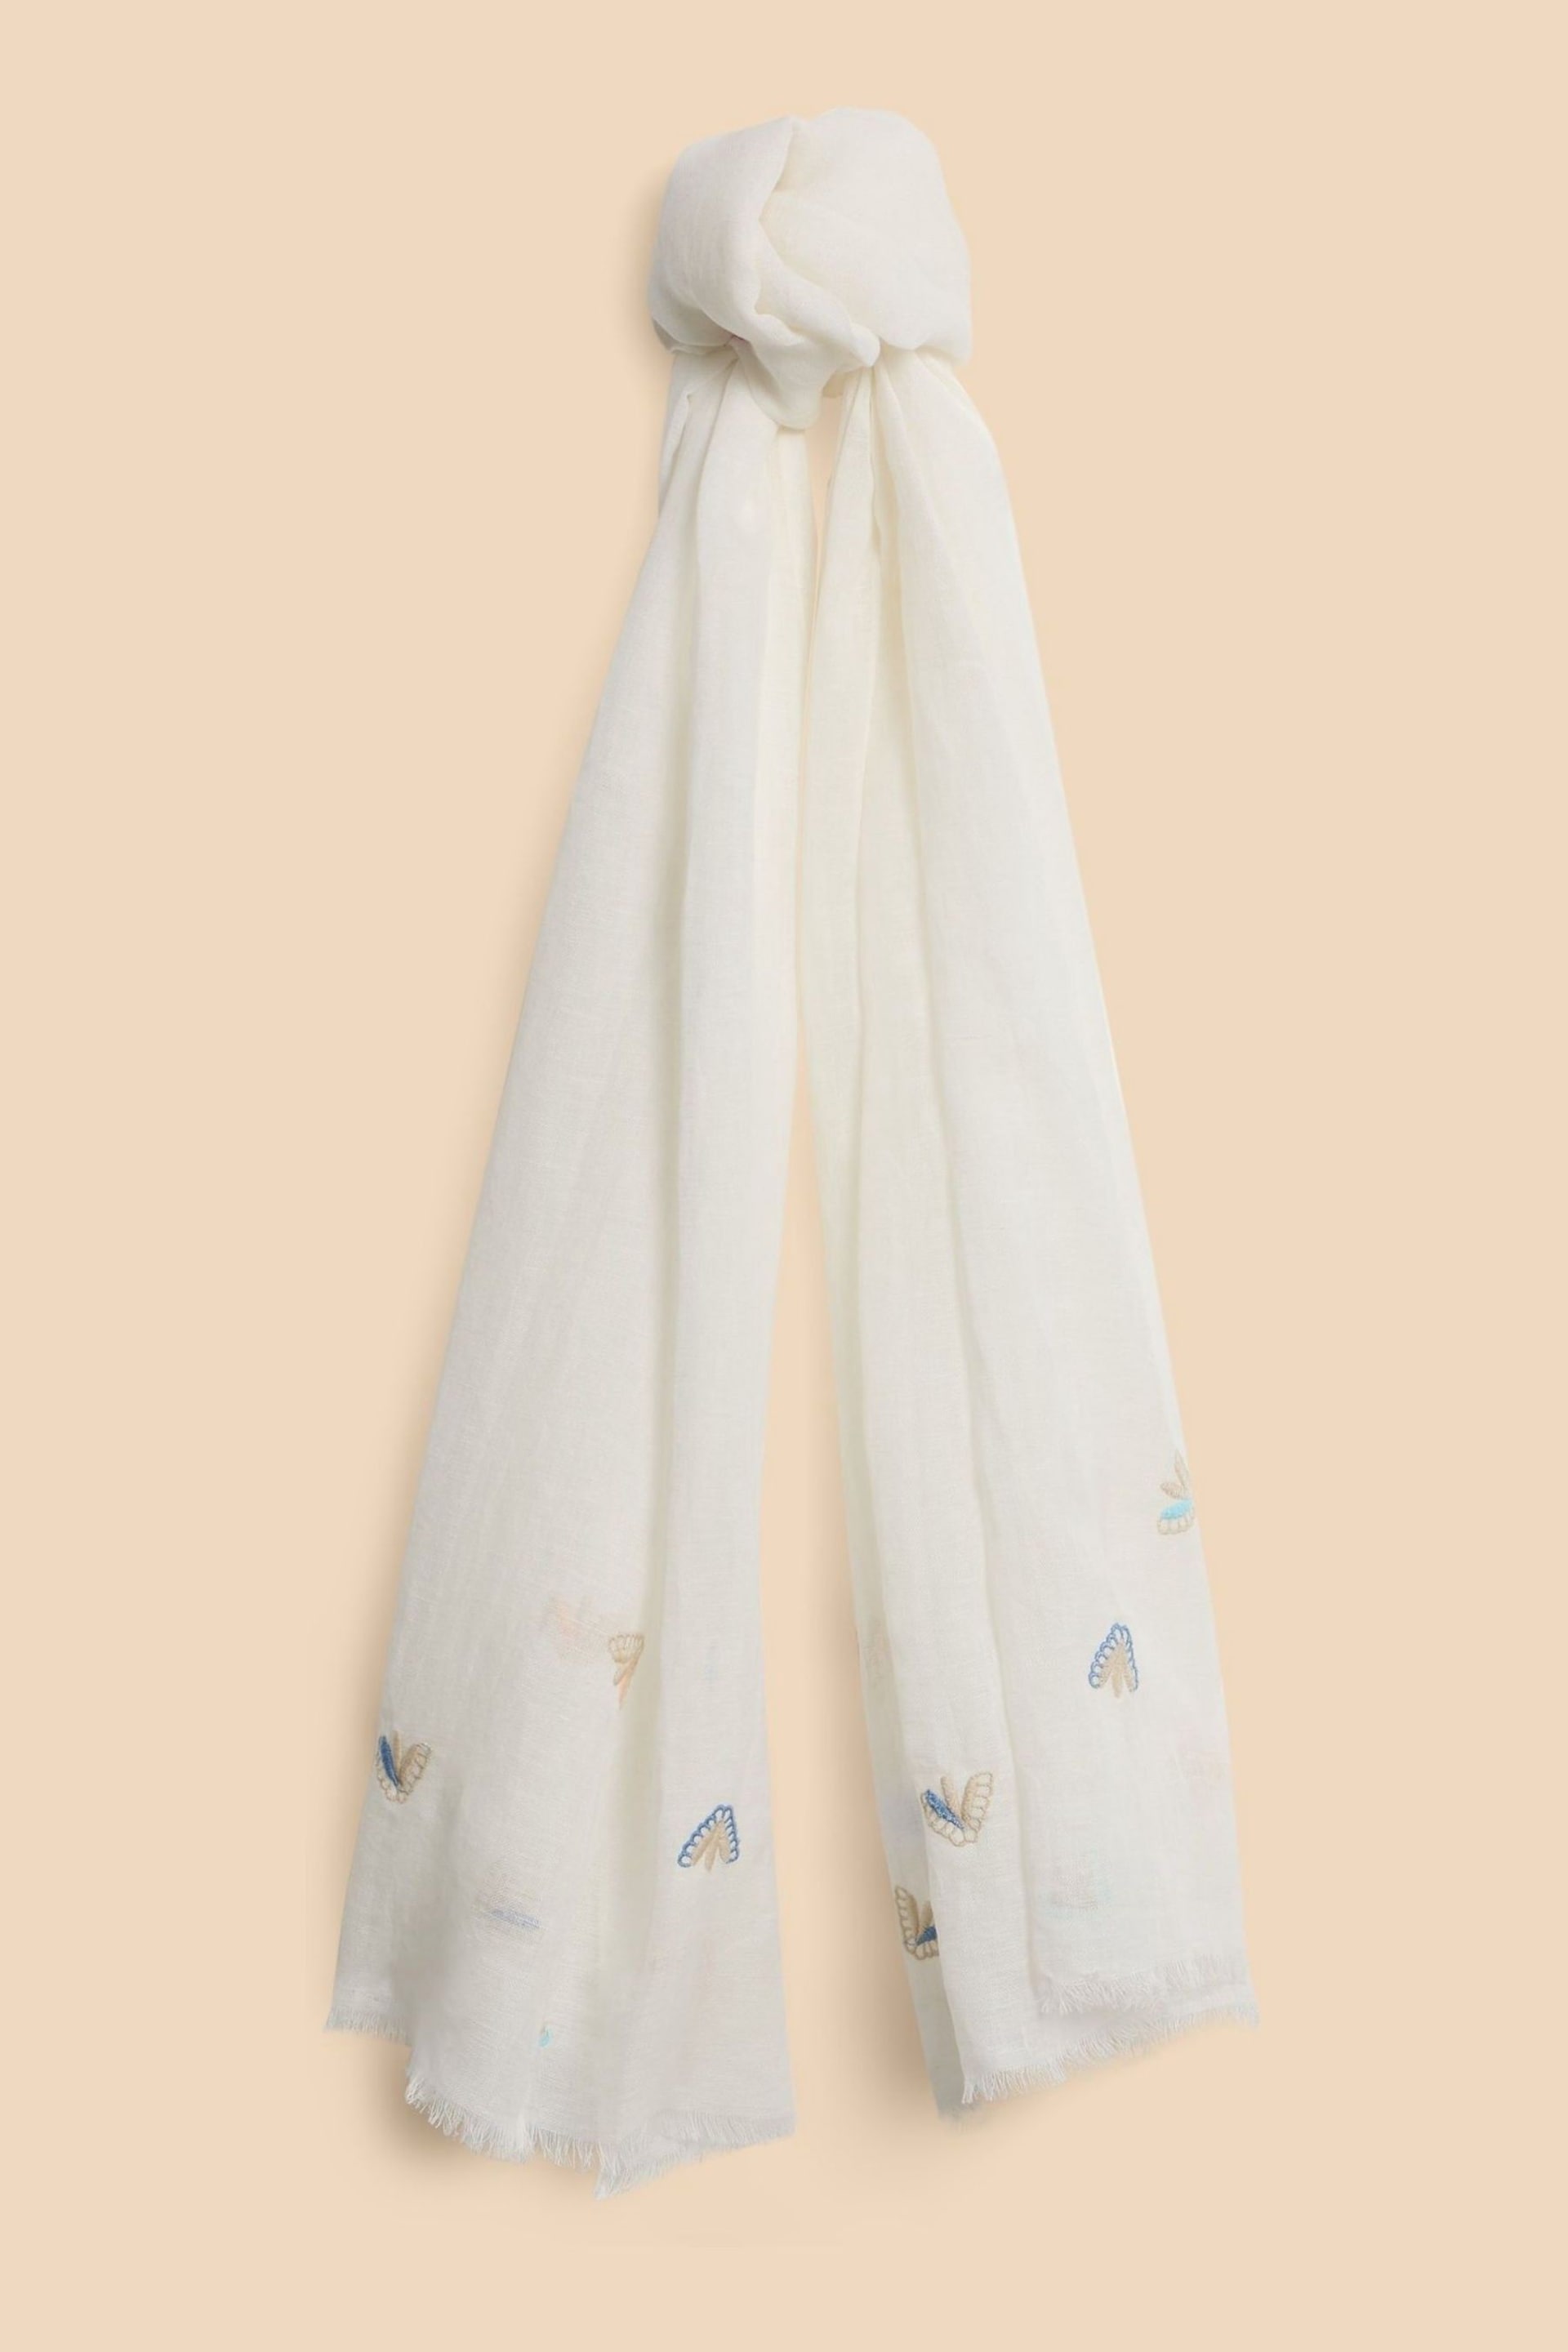 White Stuff White Embroidered Blend Scarf - Image 1 of 3